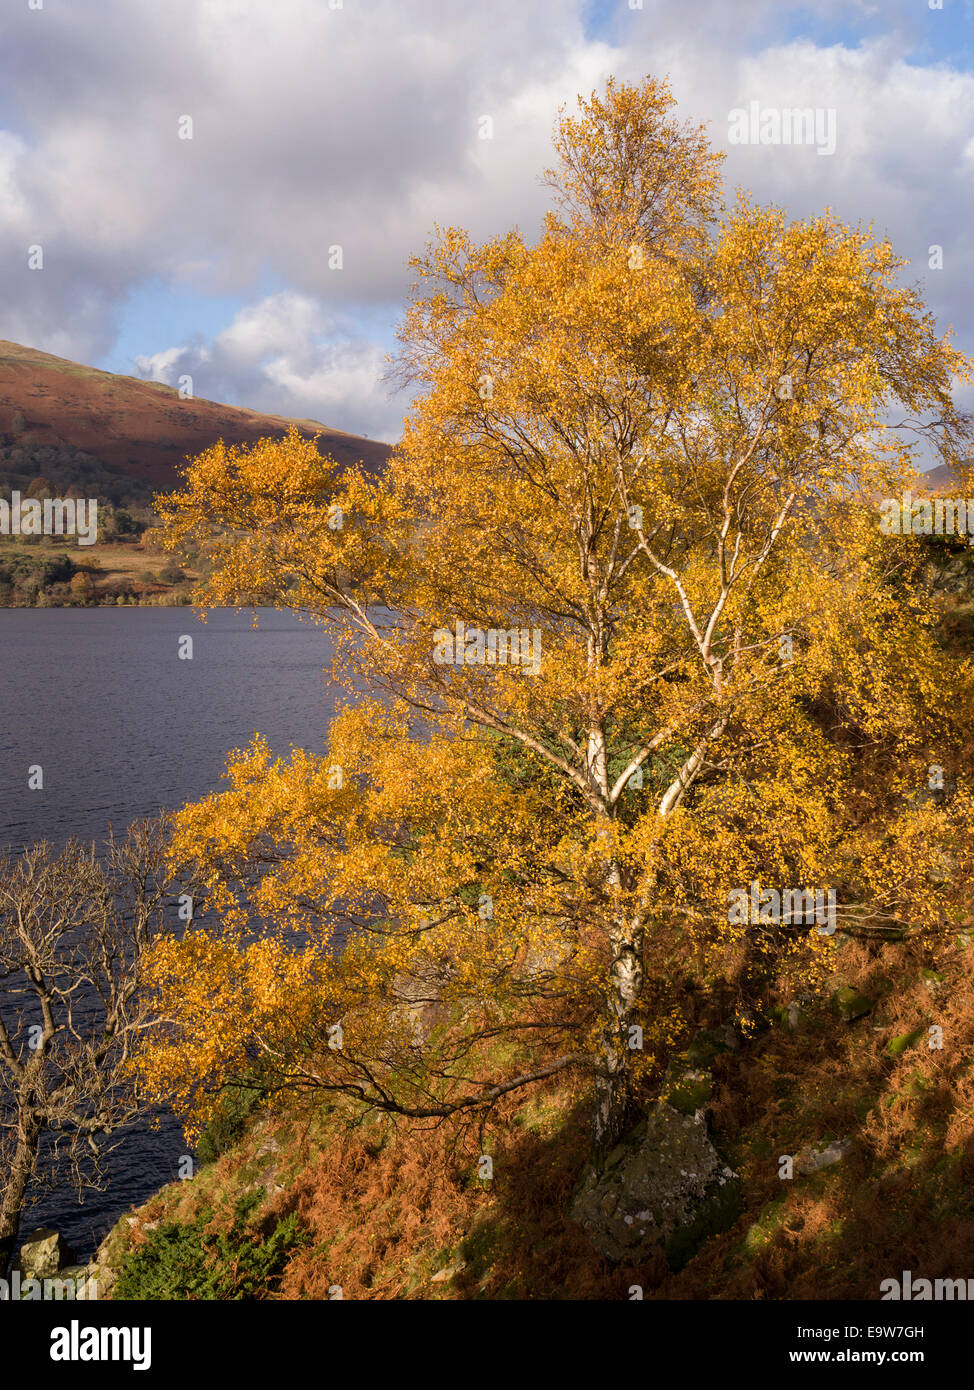 Sunlit bright yellow leaves of Silver Birch Tree in Autumn with waters of Lake Ullswater beyond, on the Ullswater Way, Lake District, Cumbria, England Stock Photo